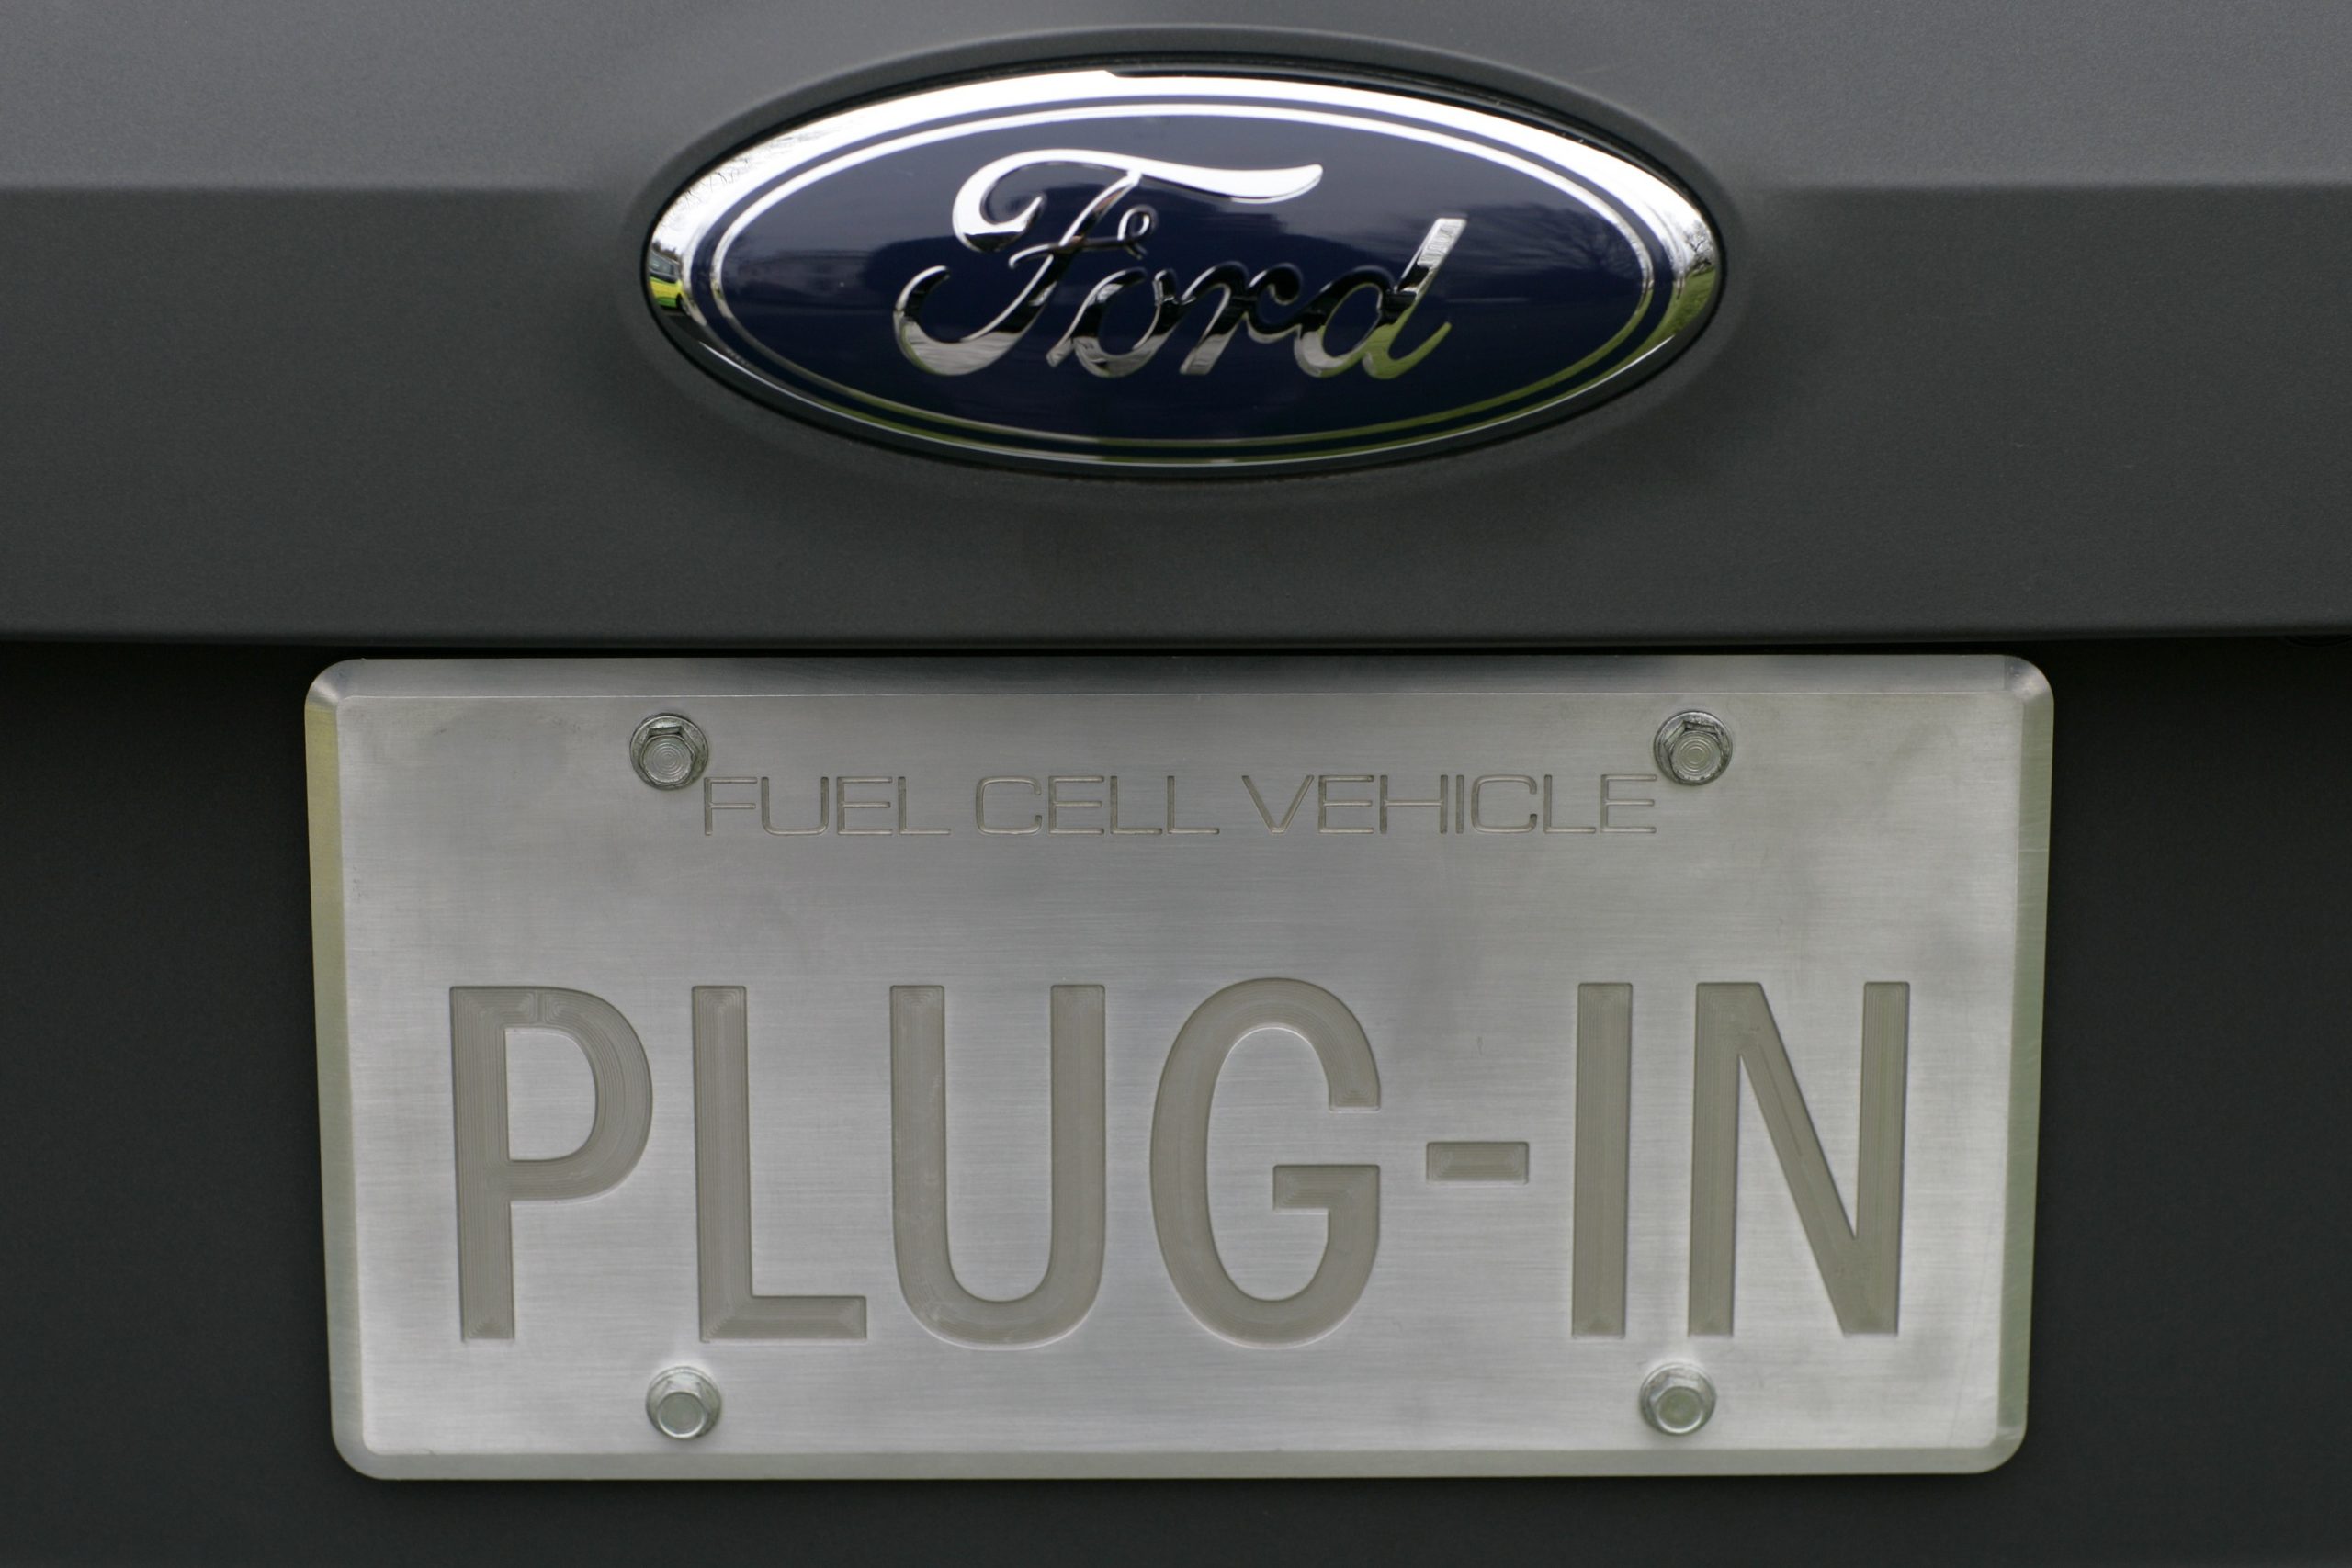 A license plate on a Ford test vehicle that reads "plug-in"